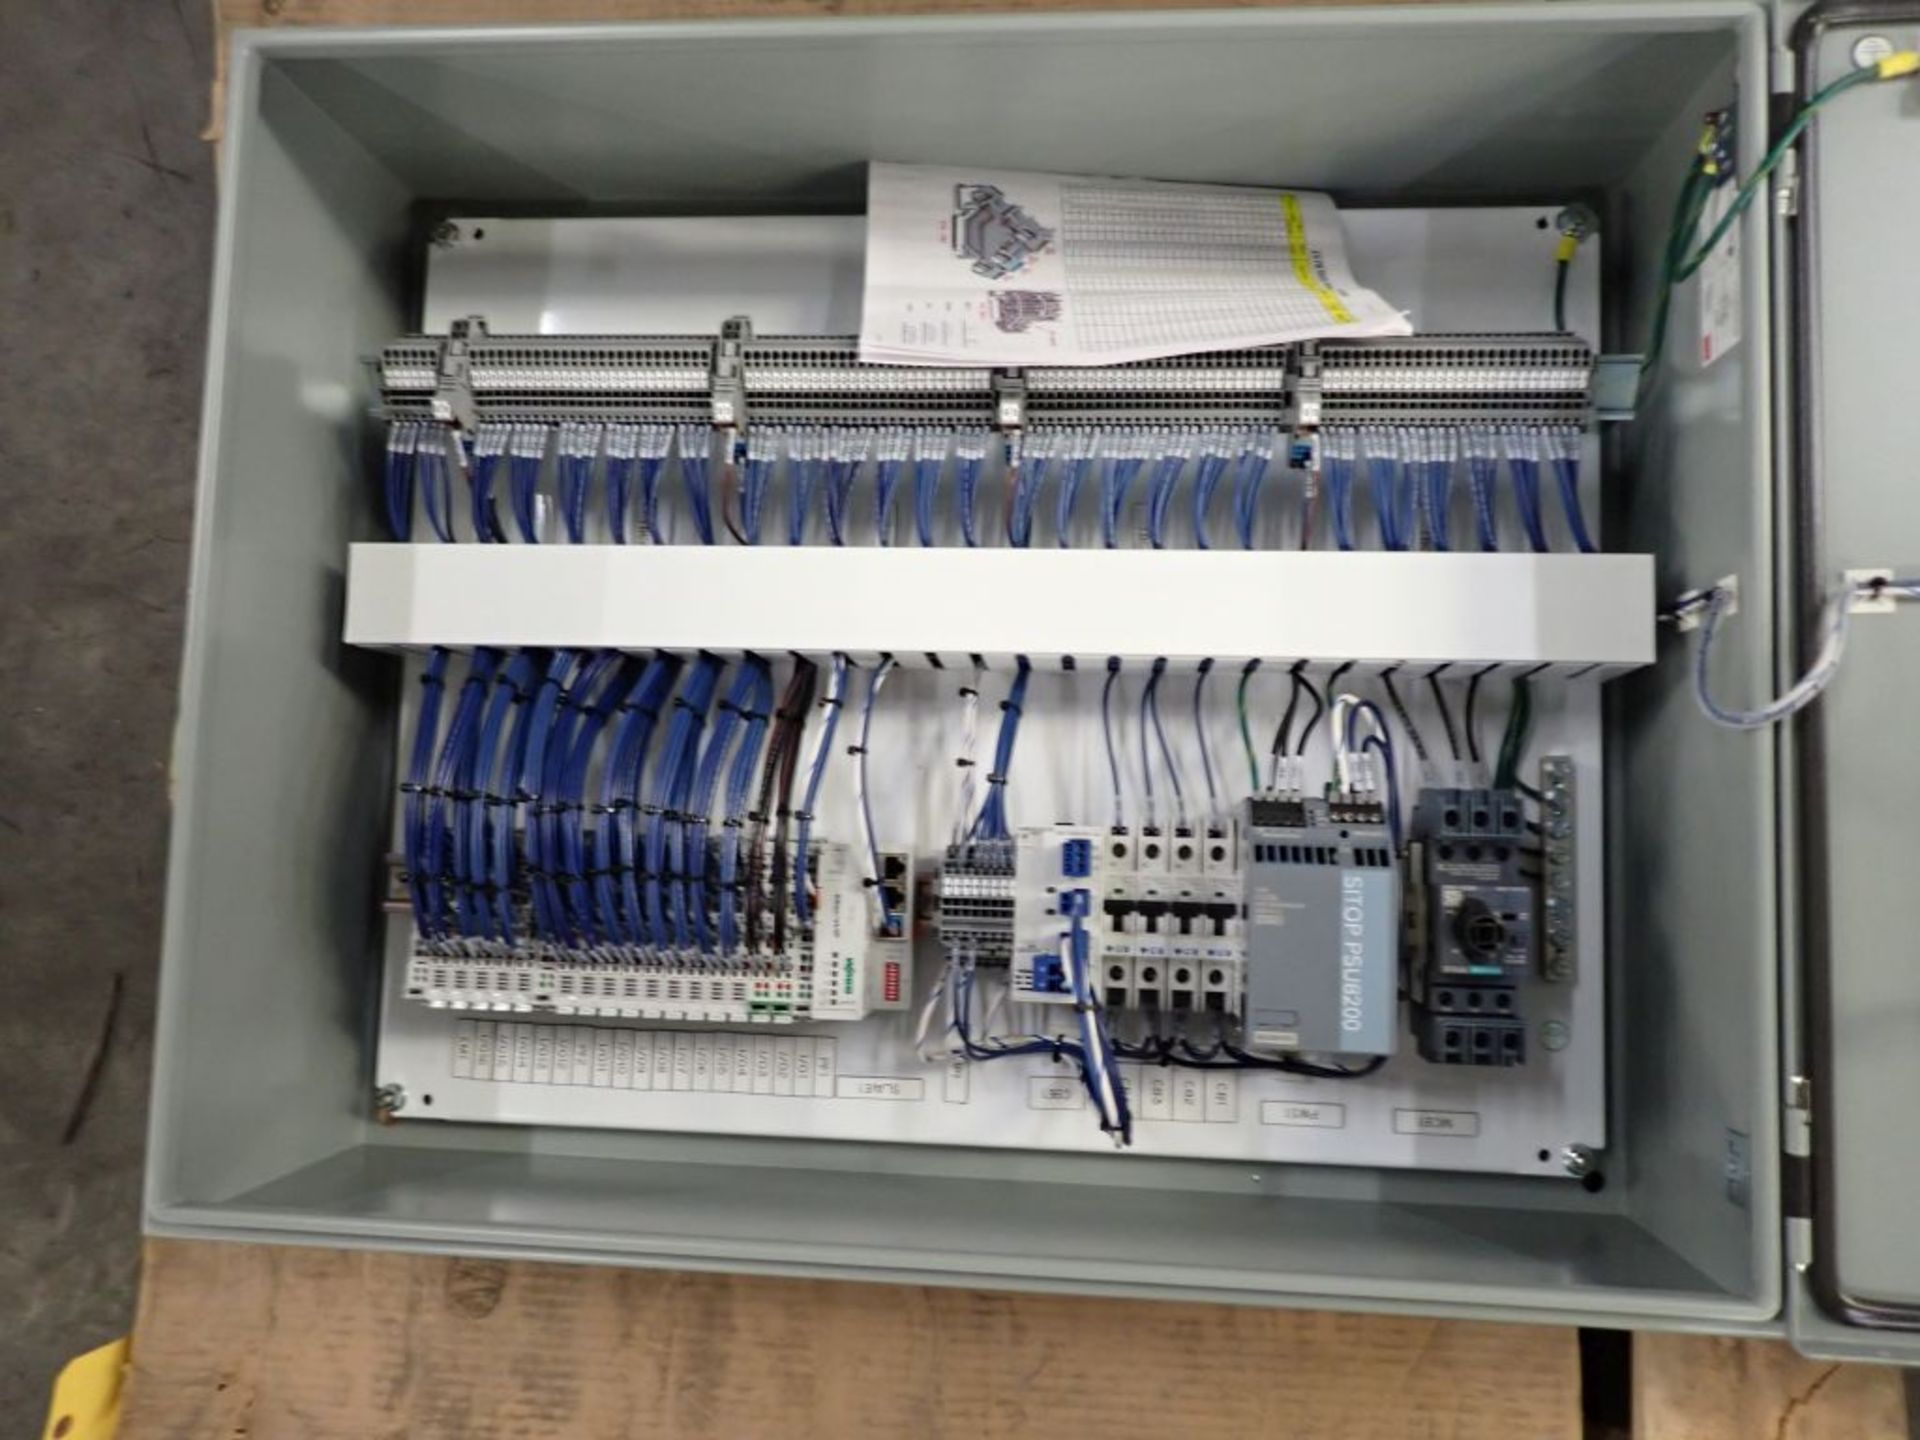 Hoffman Nvent Industrial Control Panel Enclosure with Contents - Image 5 of 9